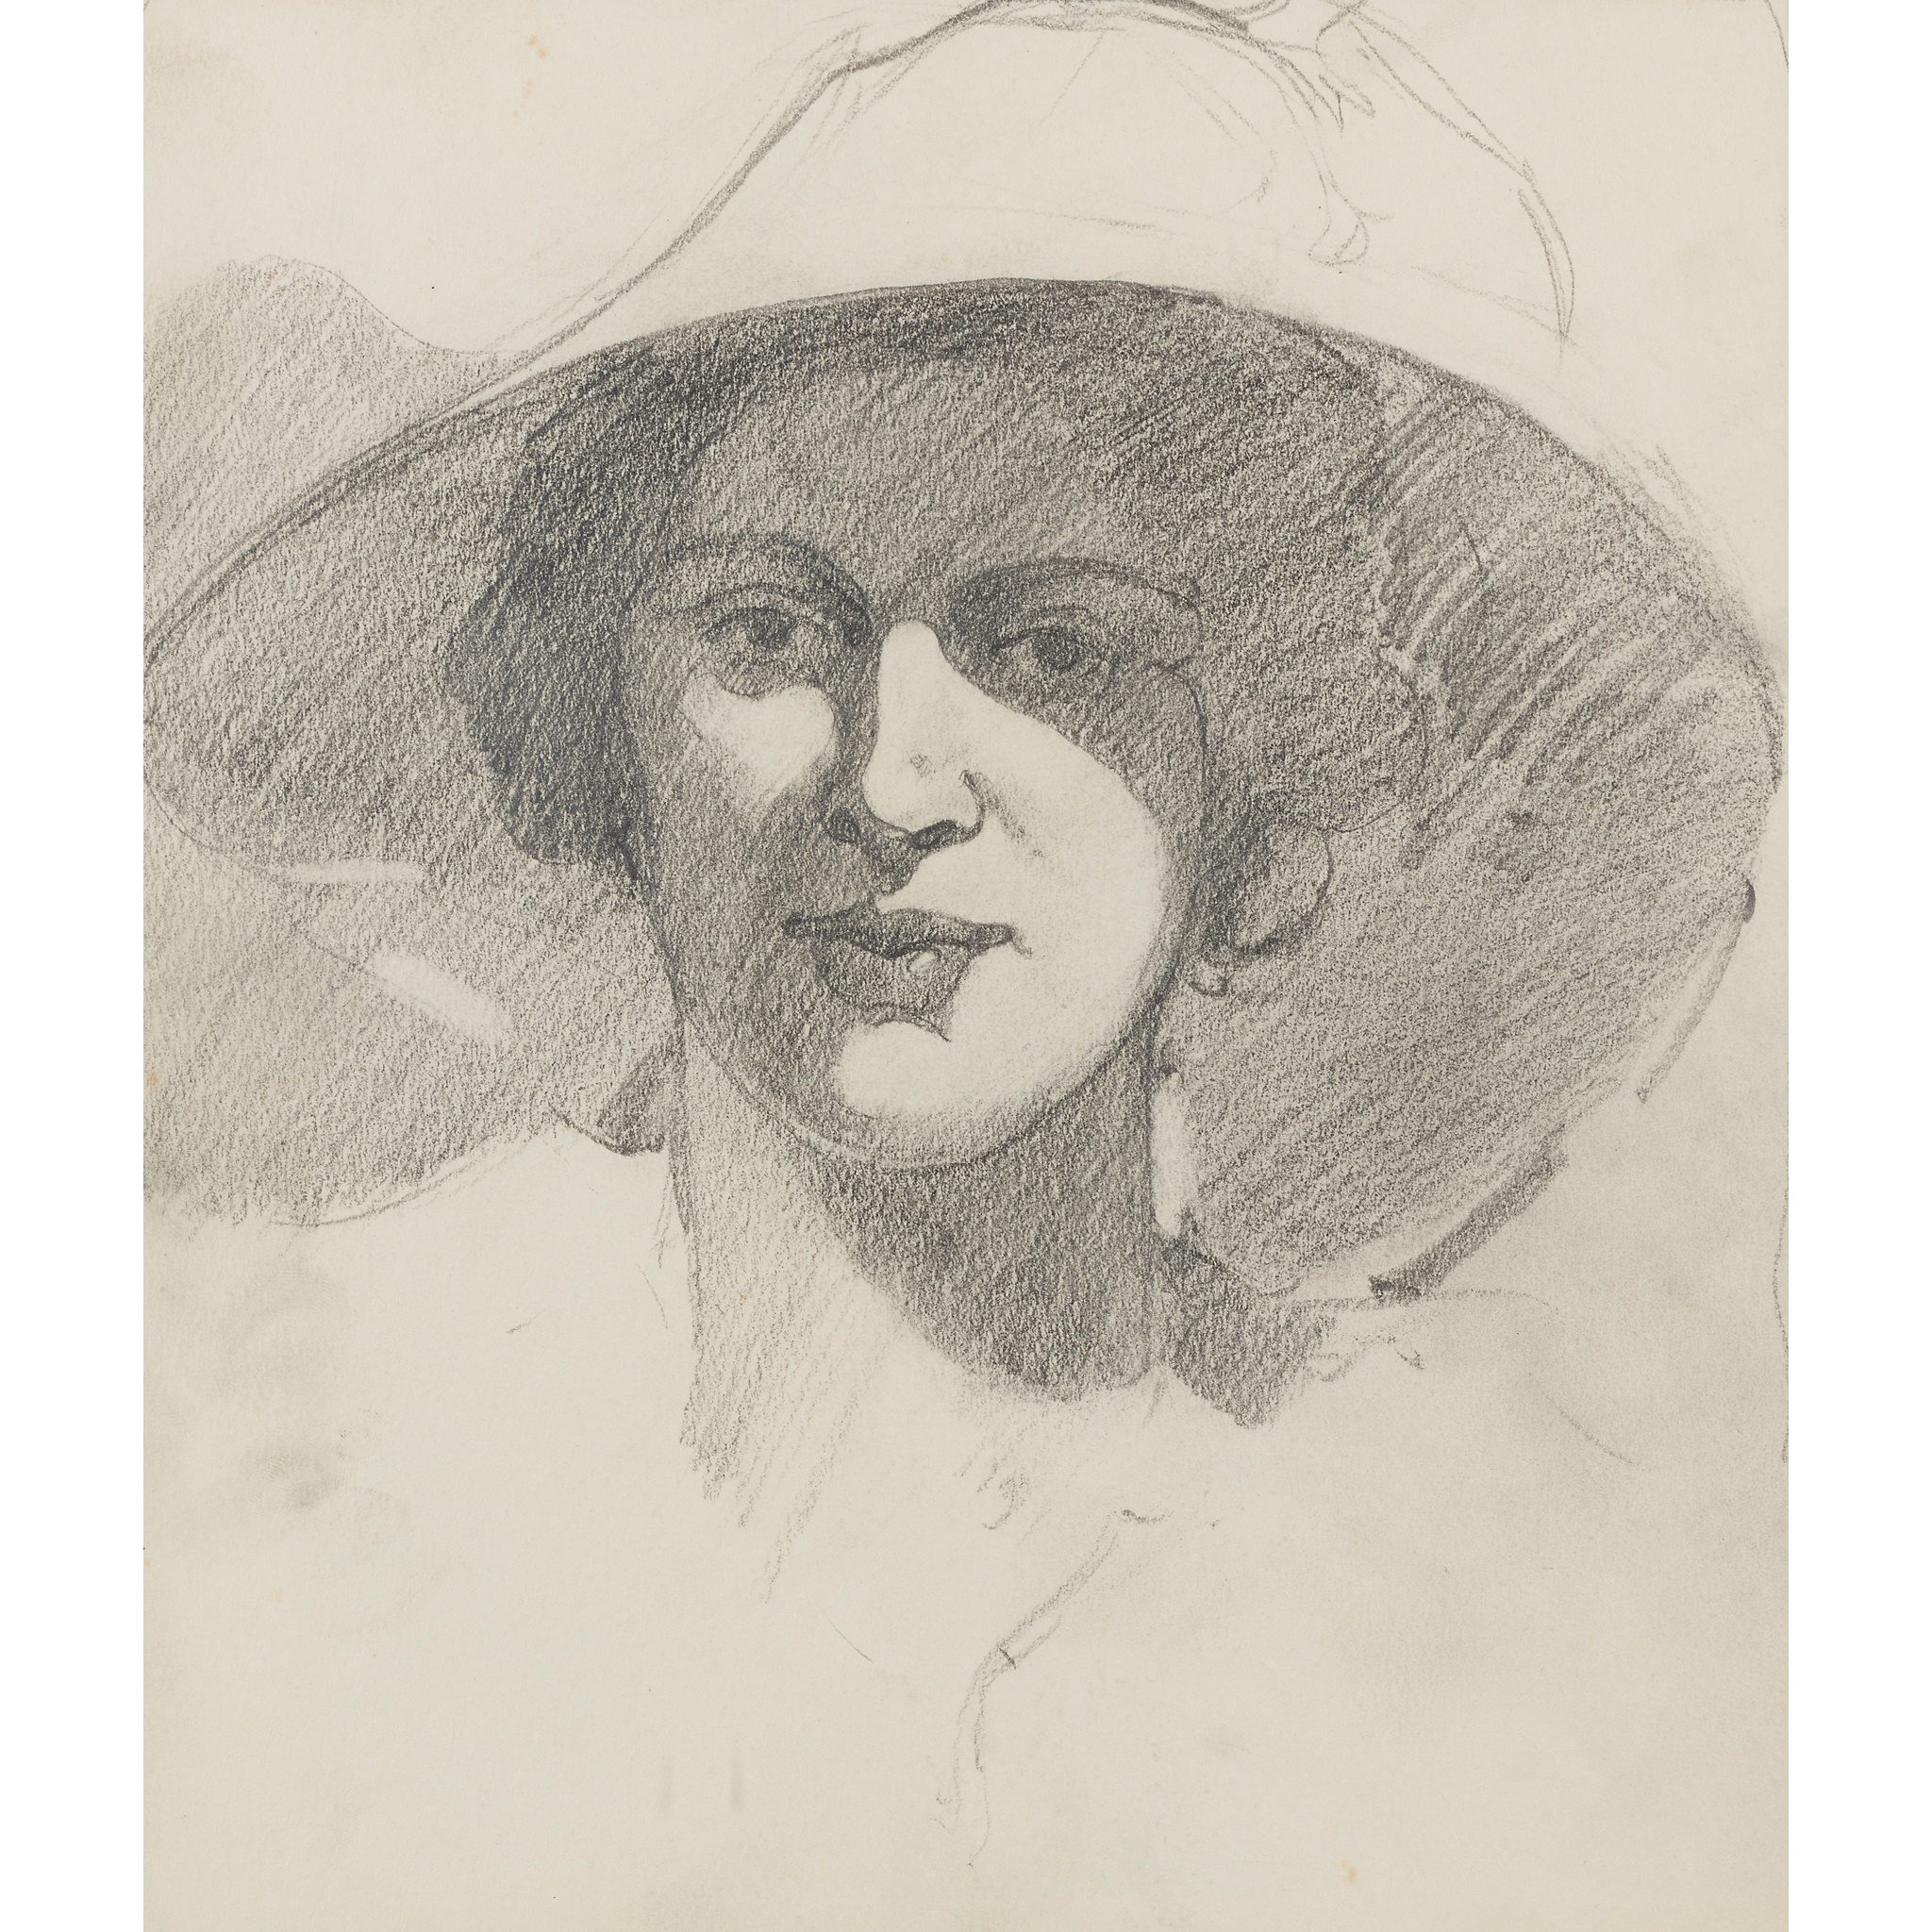 LOT 18 | § JOHN DUNCAN FERGUSSON R.B.A. (SCOTTISH 1874-1961) | WOMAN IN A LARGE HAT Pencil | 27cm x 23cm (10.5in x 9in) | Exhibited: Alexander Meddowes, J.D. Fergusson - Unseen Works, 2013/14, no.5 £2,000 - £3,000 + fees